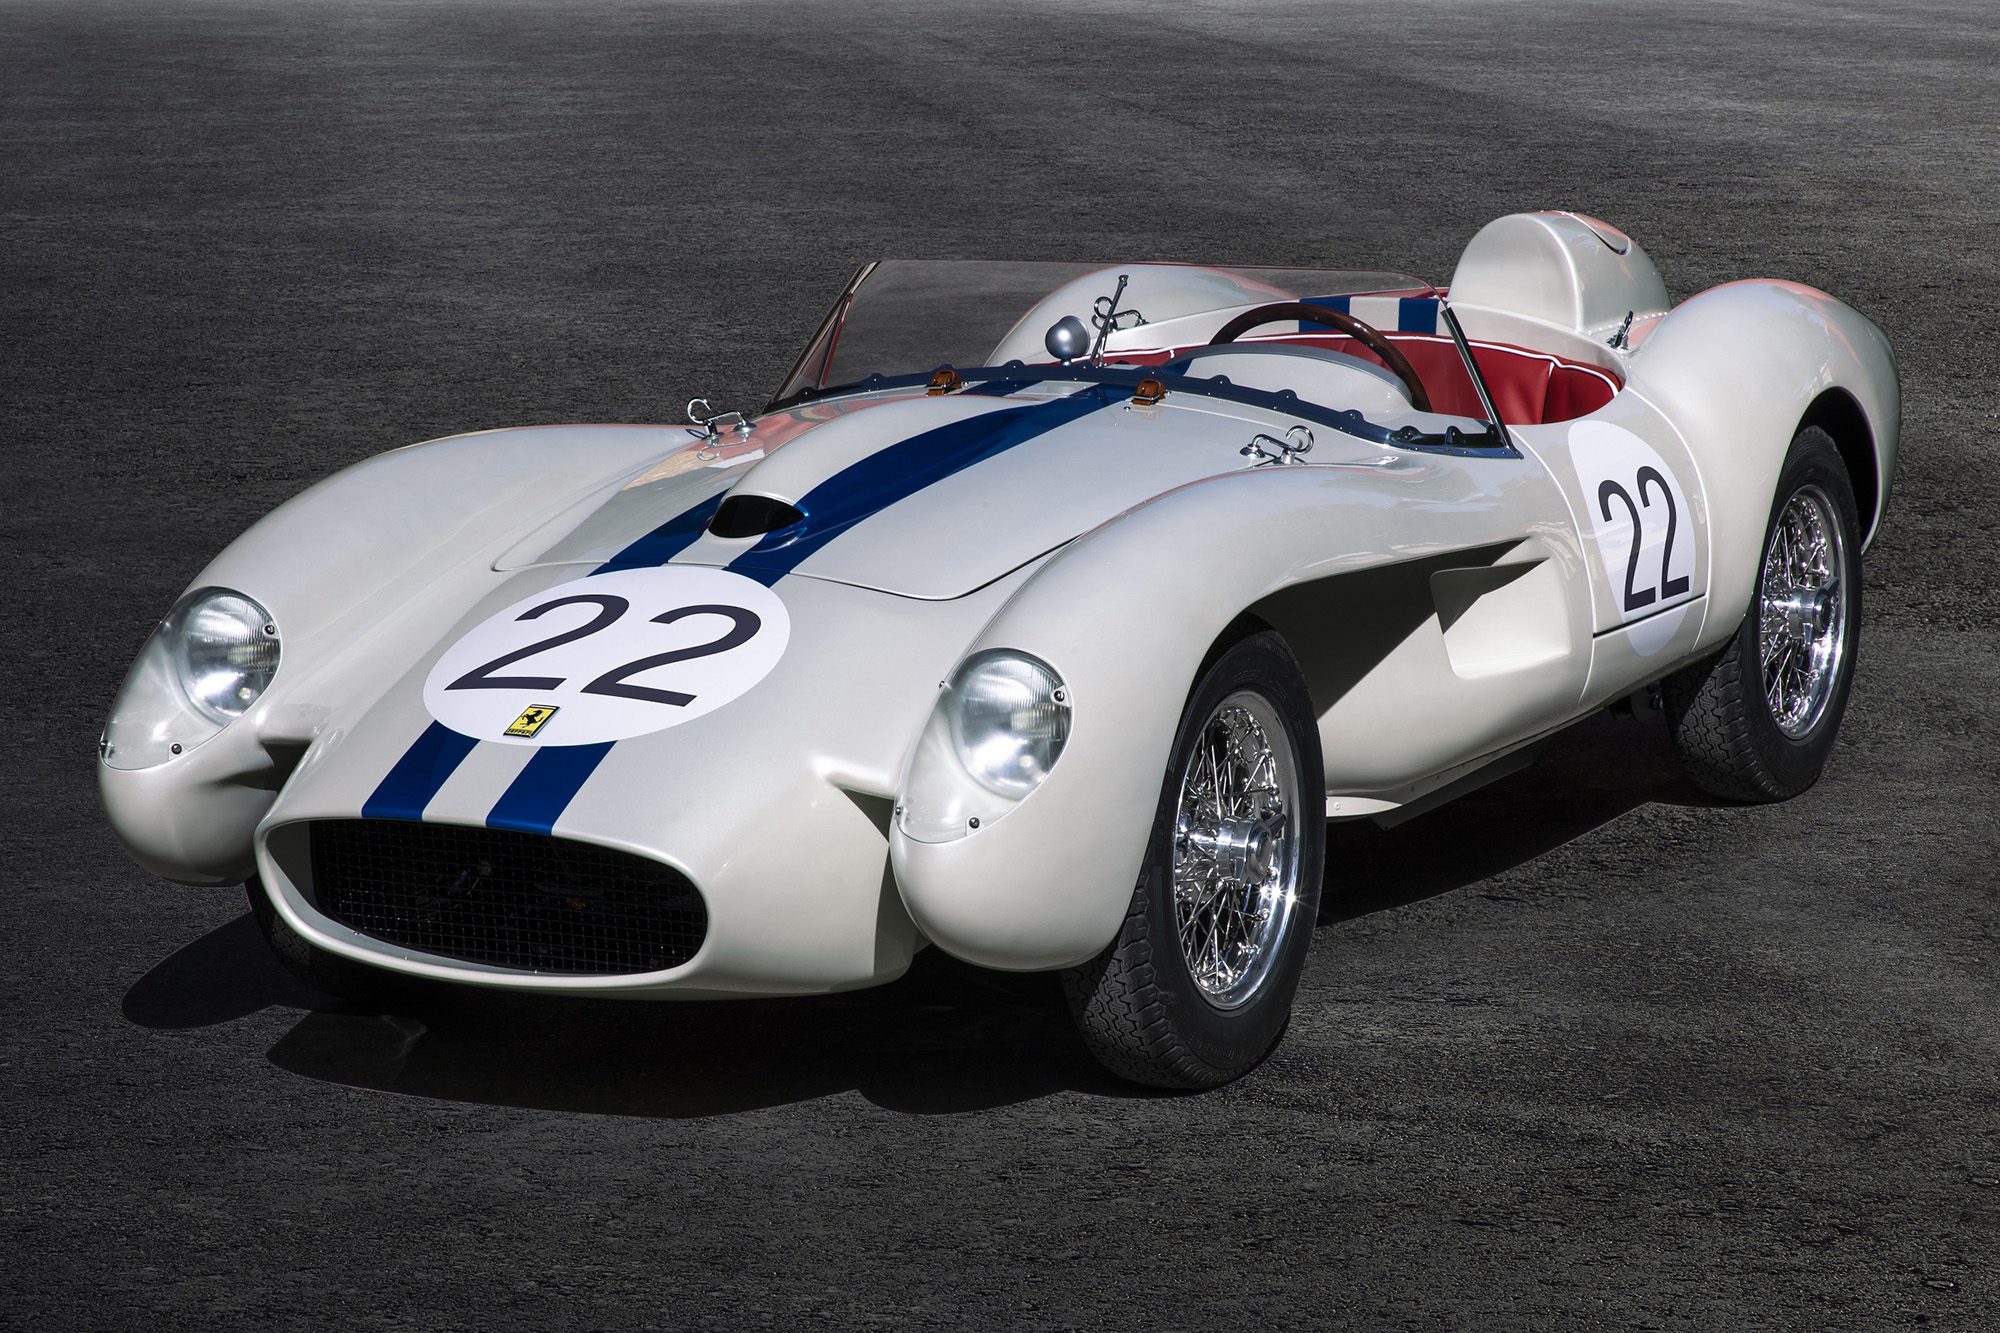 A small cars firm has created a one-off Ferrari Testa Rossa J set to go on an auction held in Carmel, California on August 19, 2022. Undated photograph. (The Little Car Company,SWNS/Zenger News)